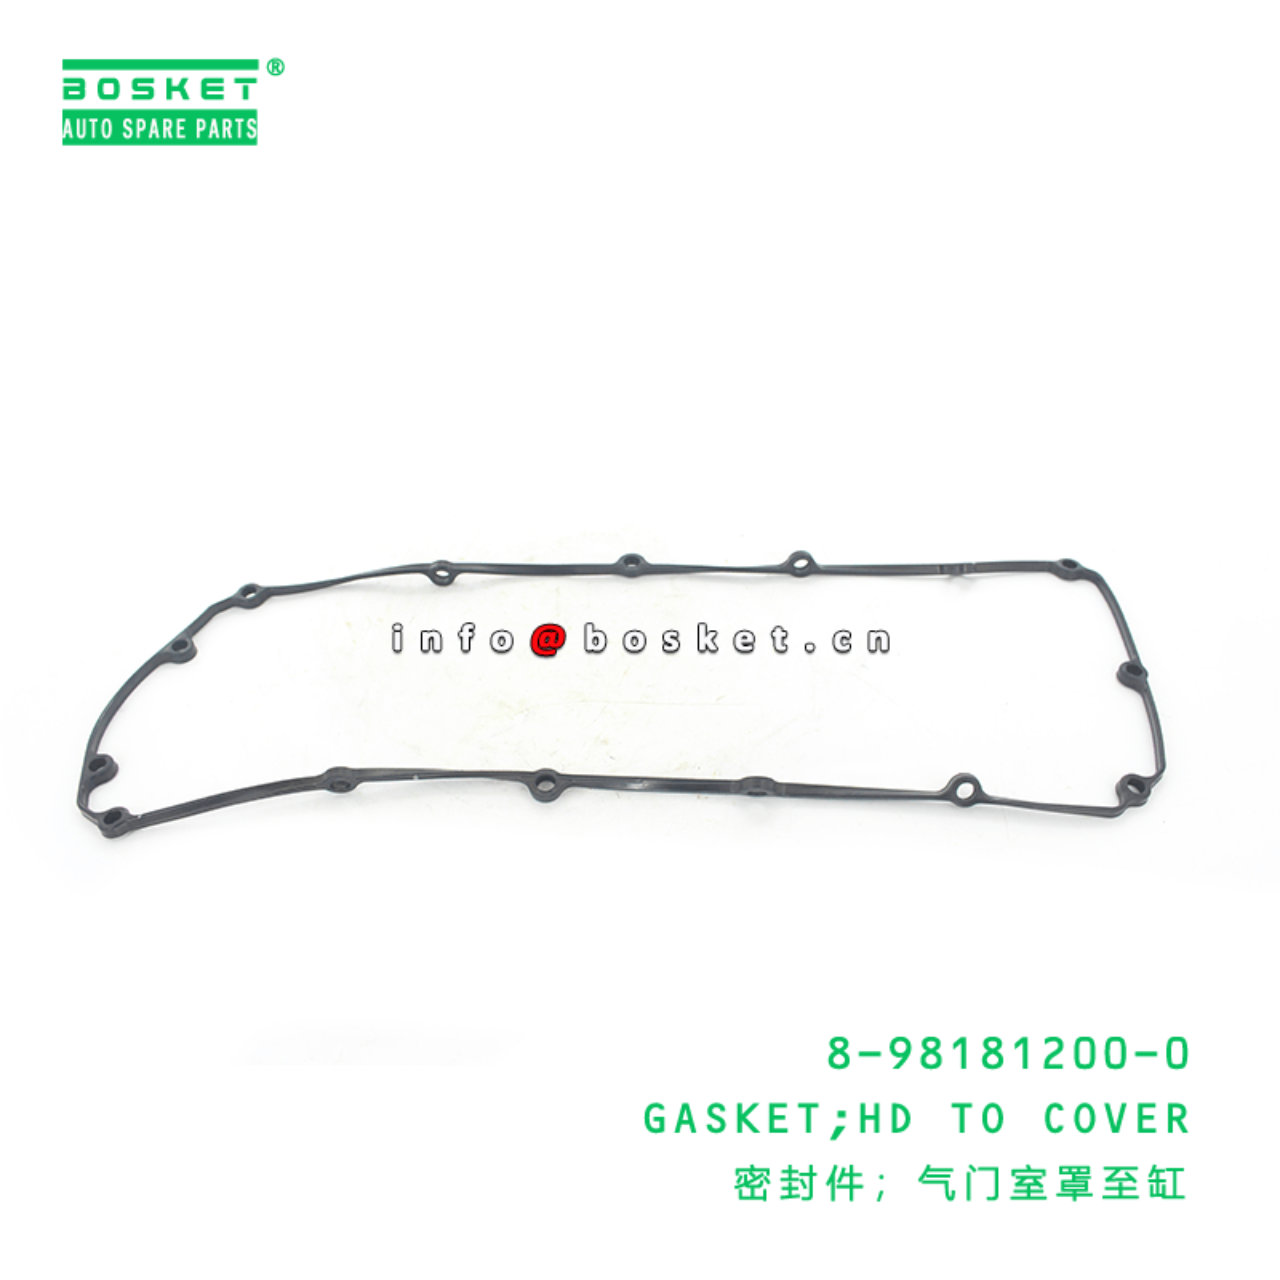 8-98181200-0 Head To Cover Gasket 8981812000 Suitable for ISUZU NPR